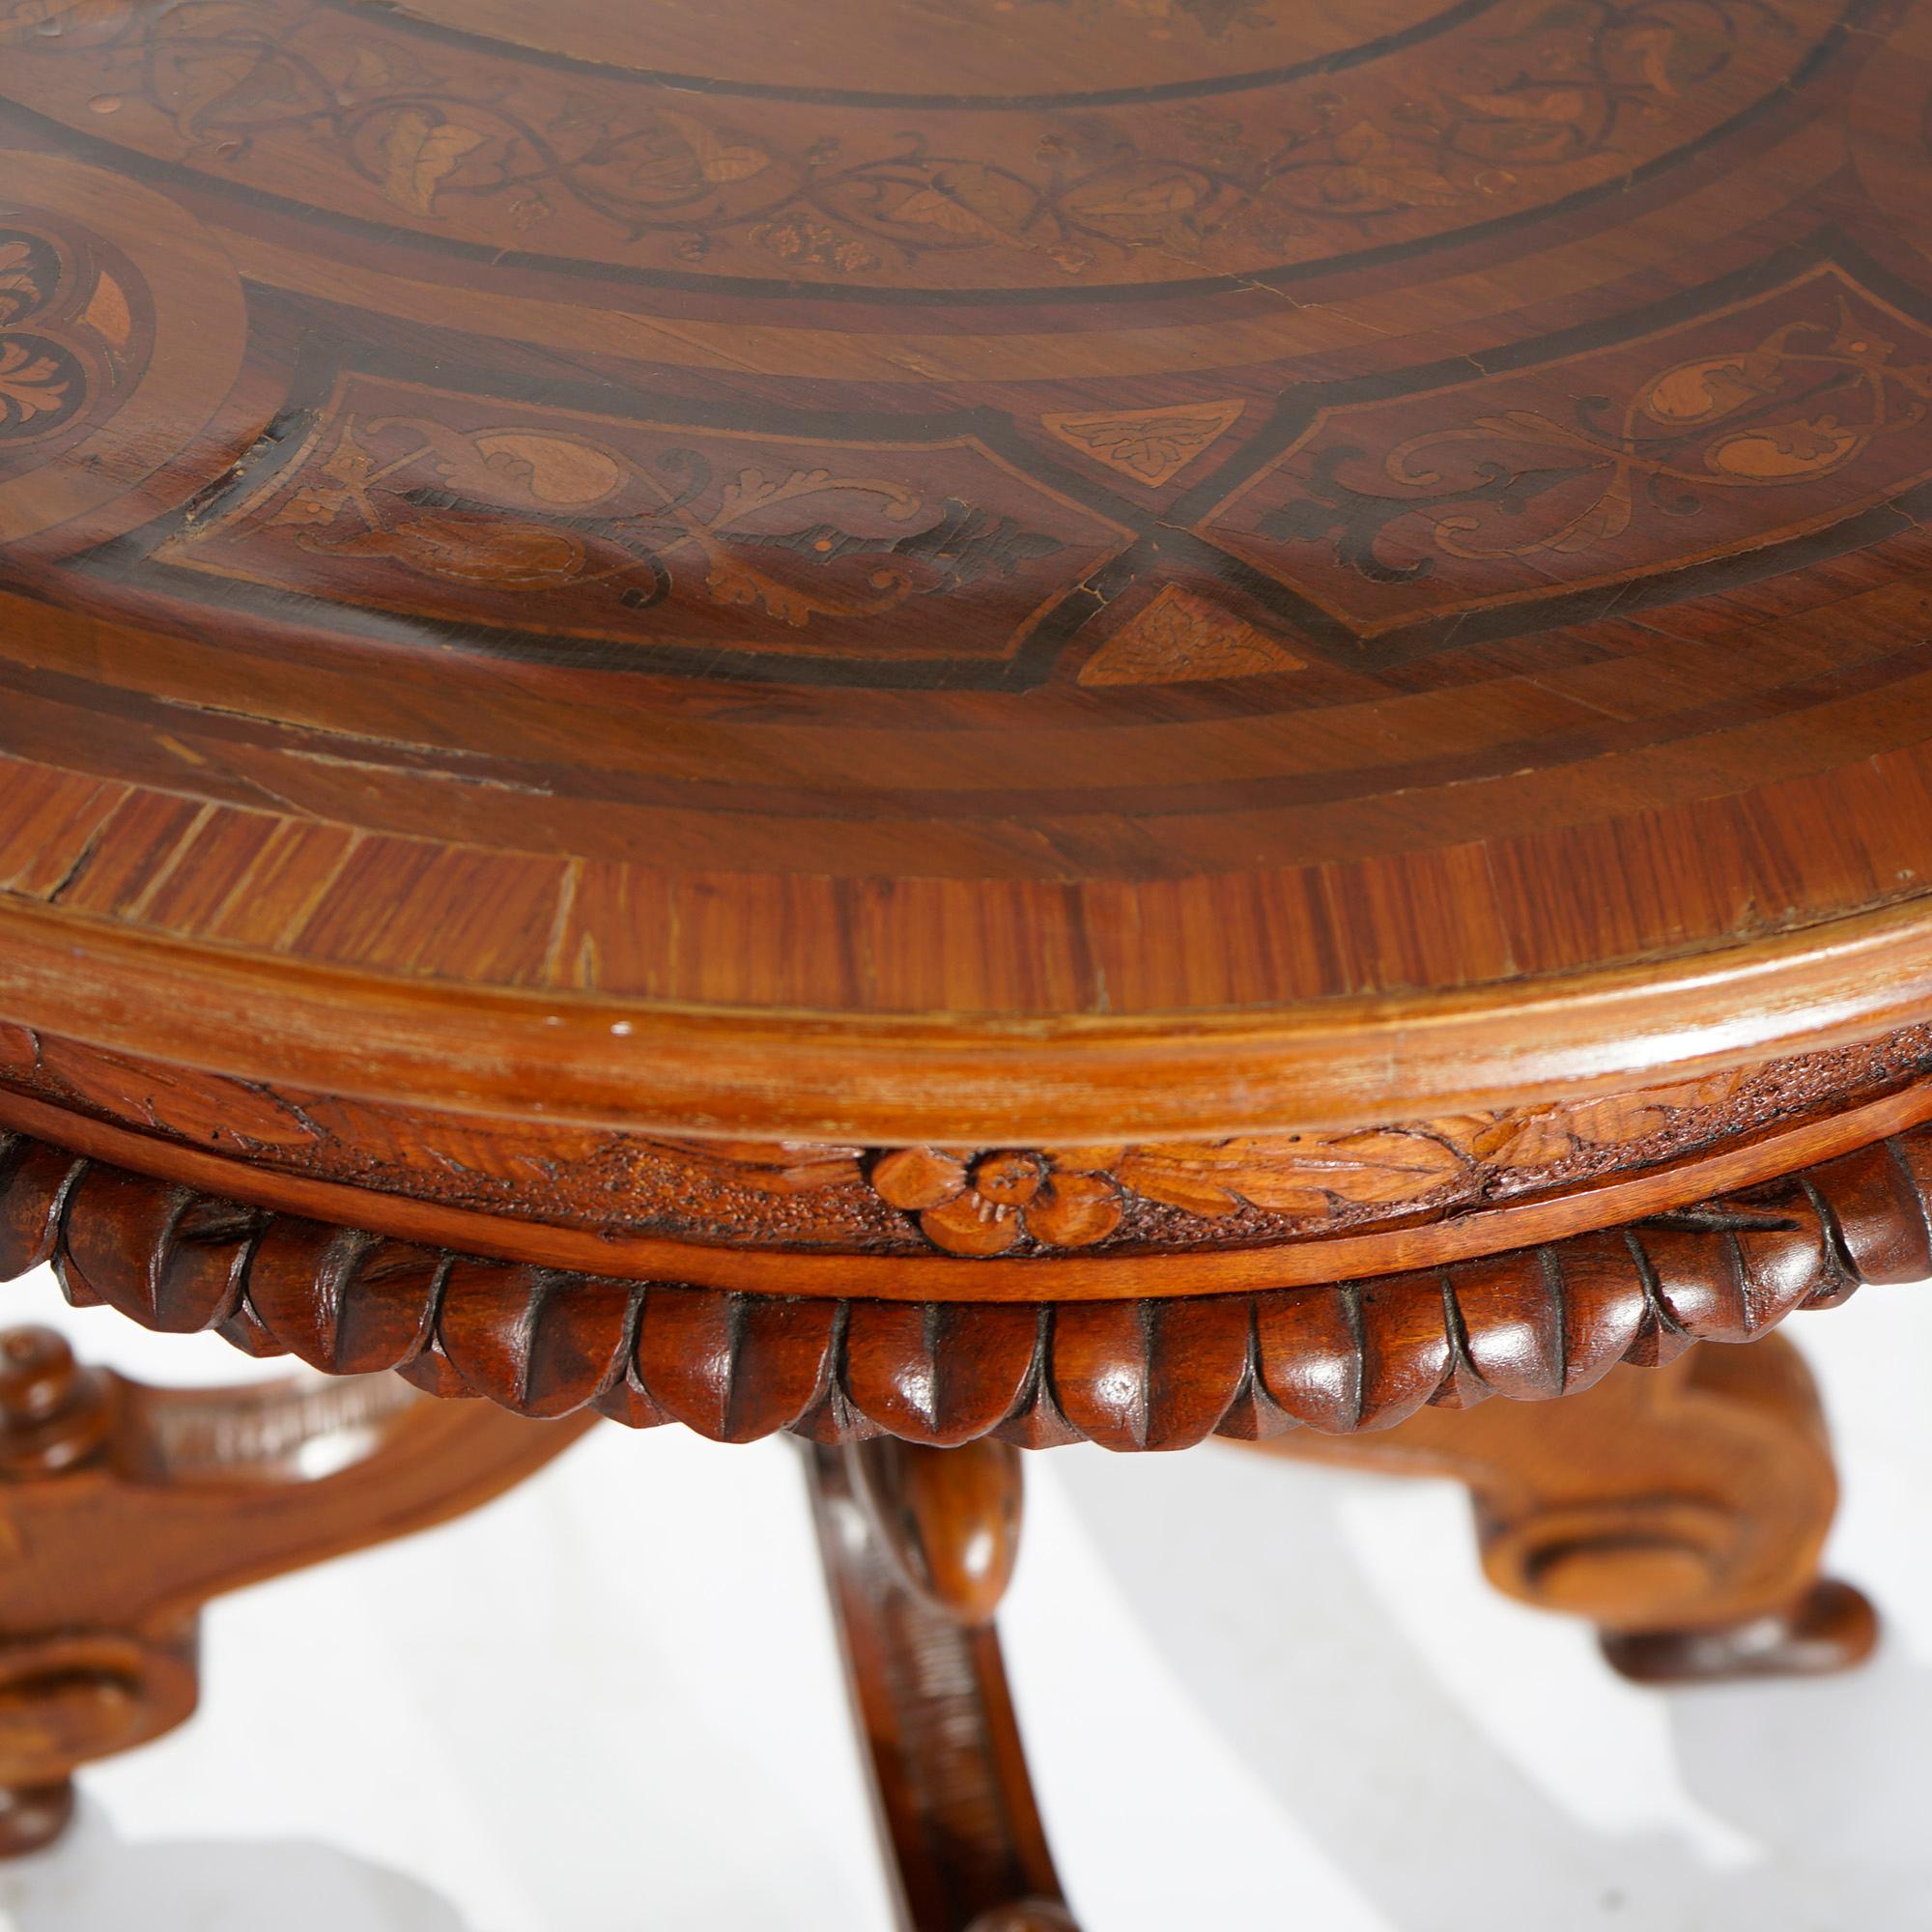 Antique Classical Marquetry Inlaid & Figural Carved Kingwood Center Table 19th C For Sale 6